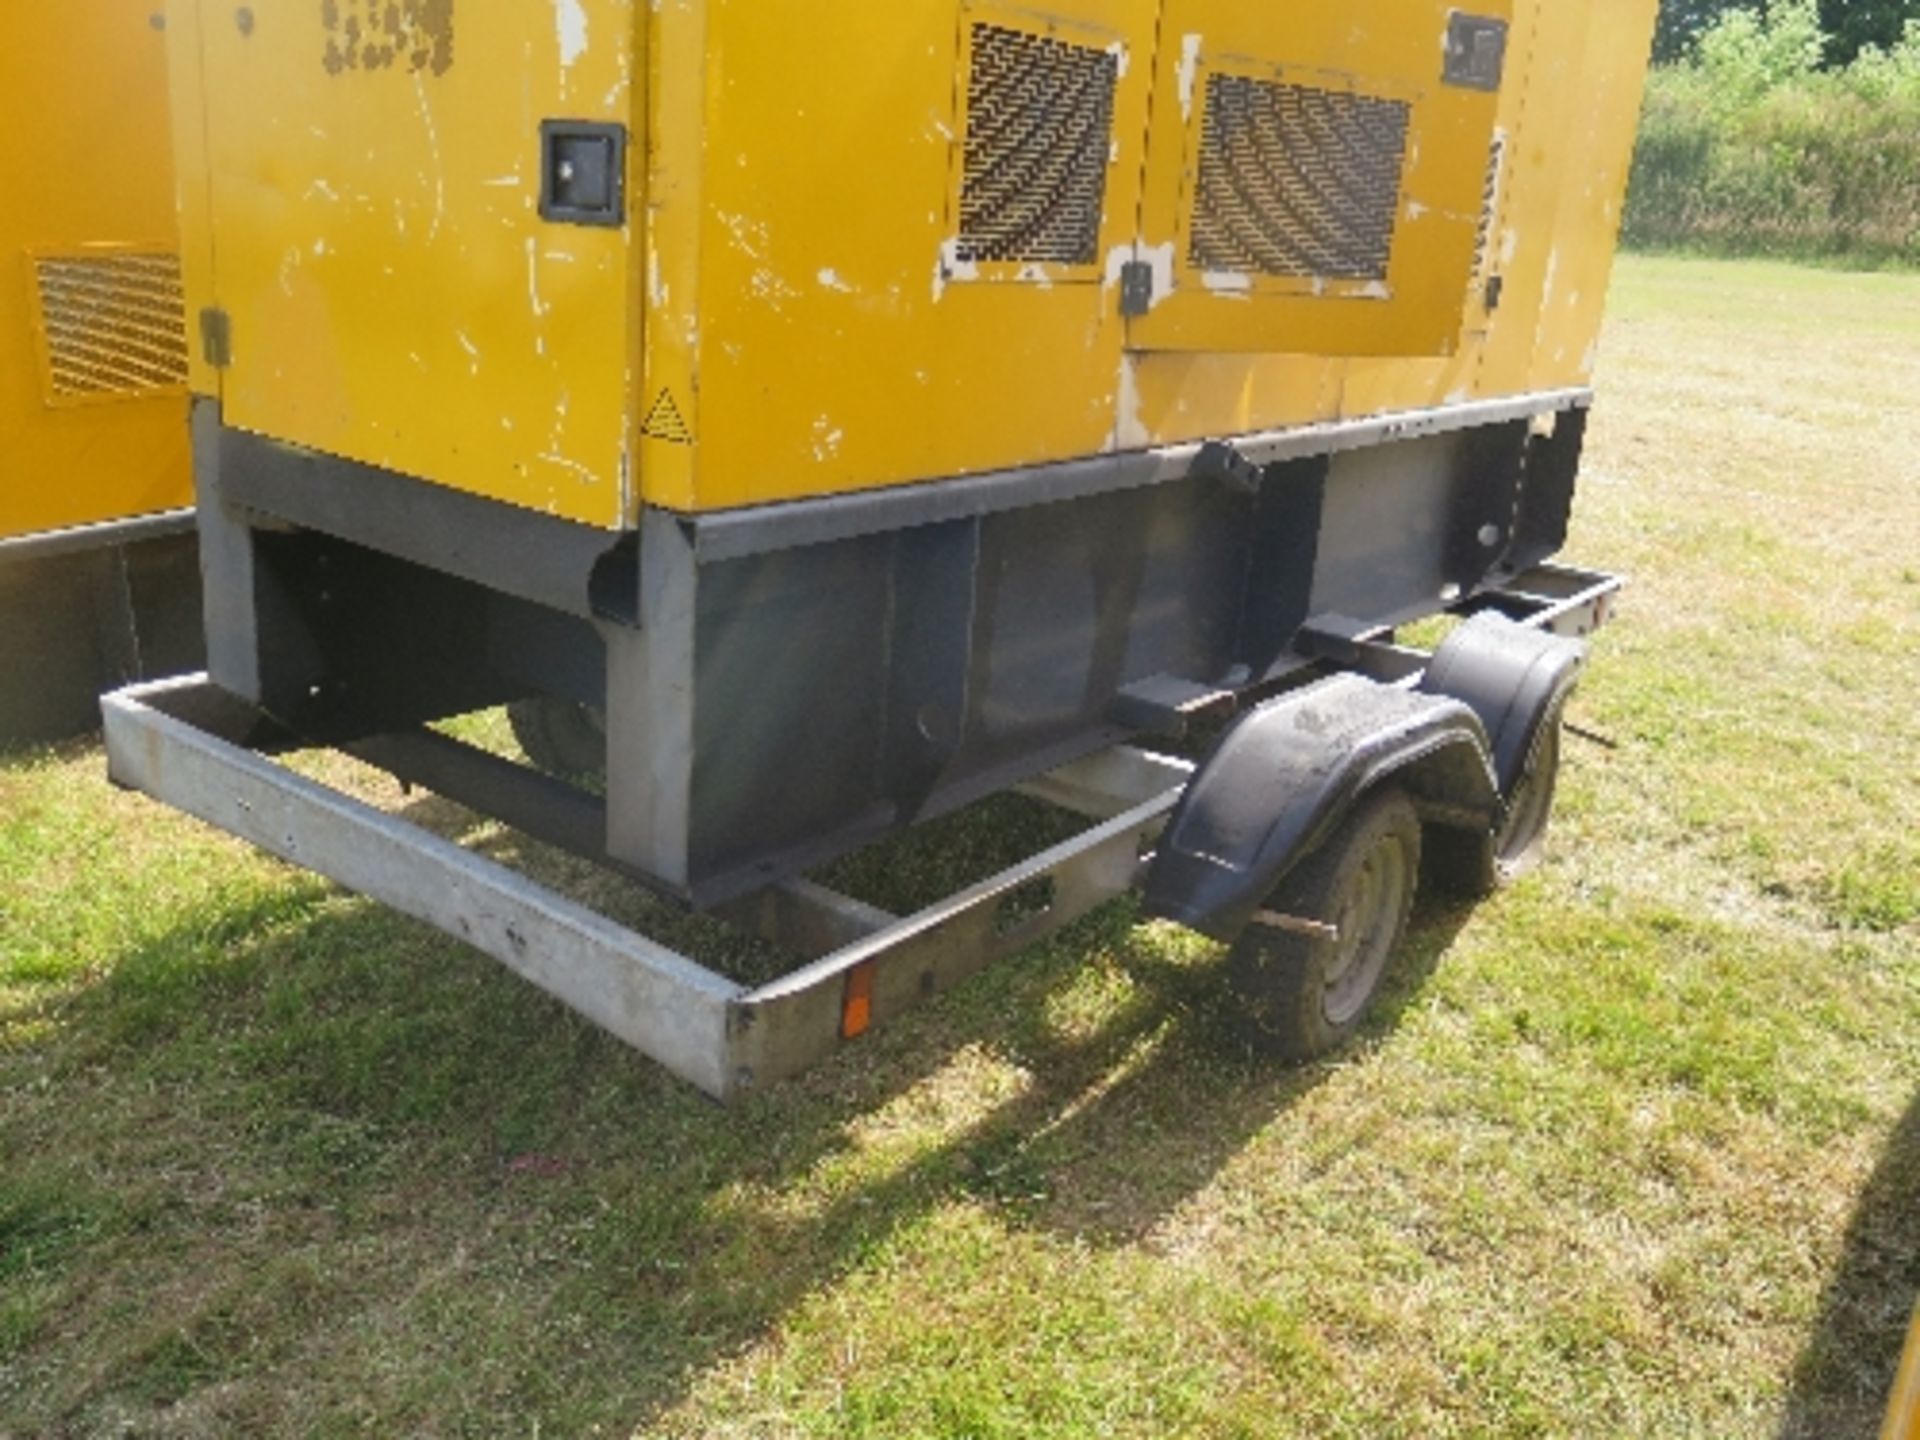 Caterpillar XQE100 trailer mounted generator 22493 hrs 138829
PERKINS - RUNS AND MAKES POWER
ALL - Image 6 of 8